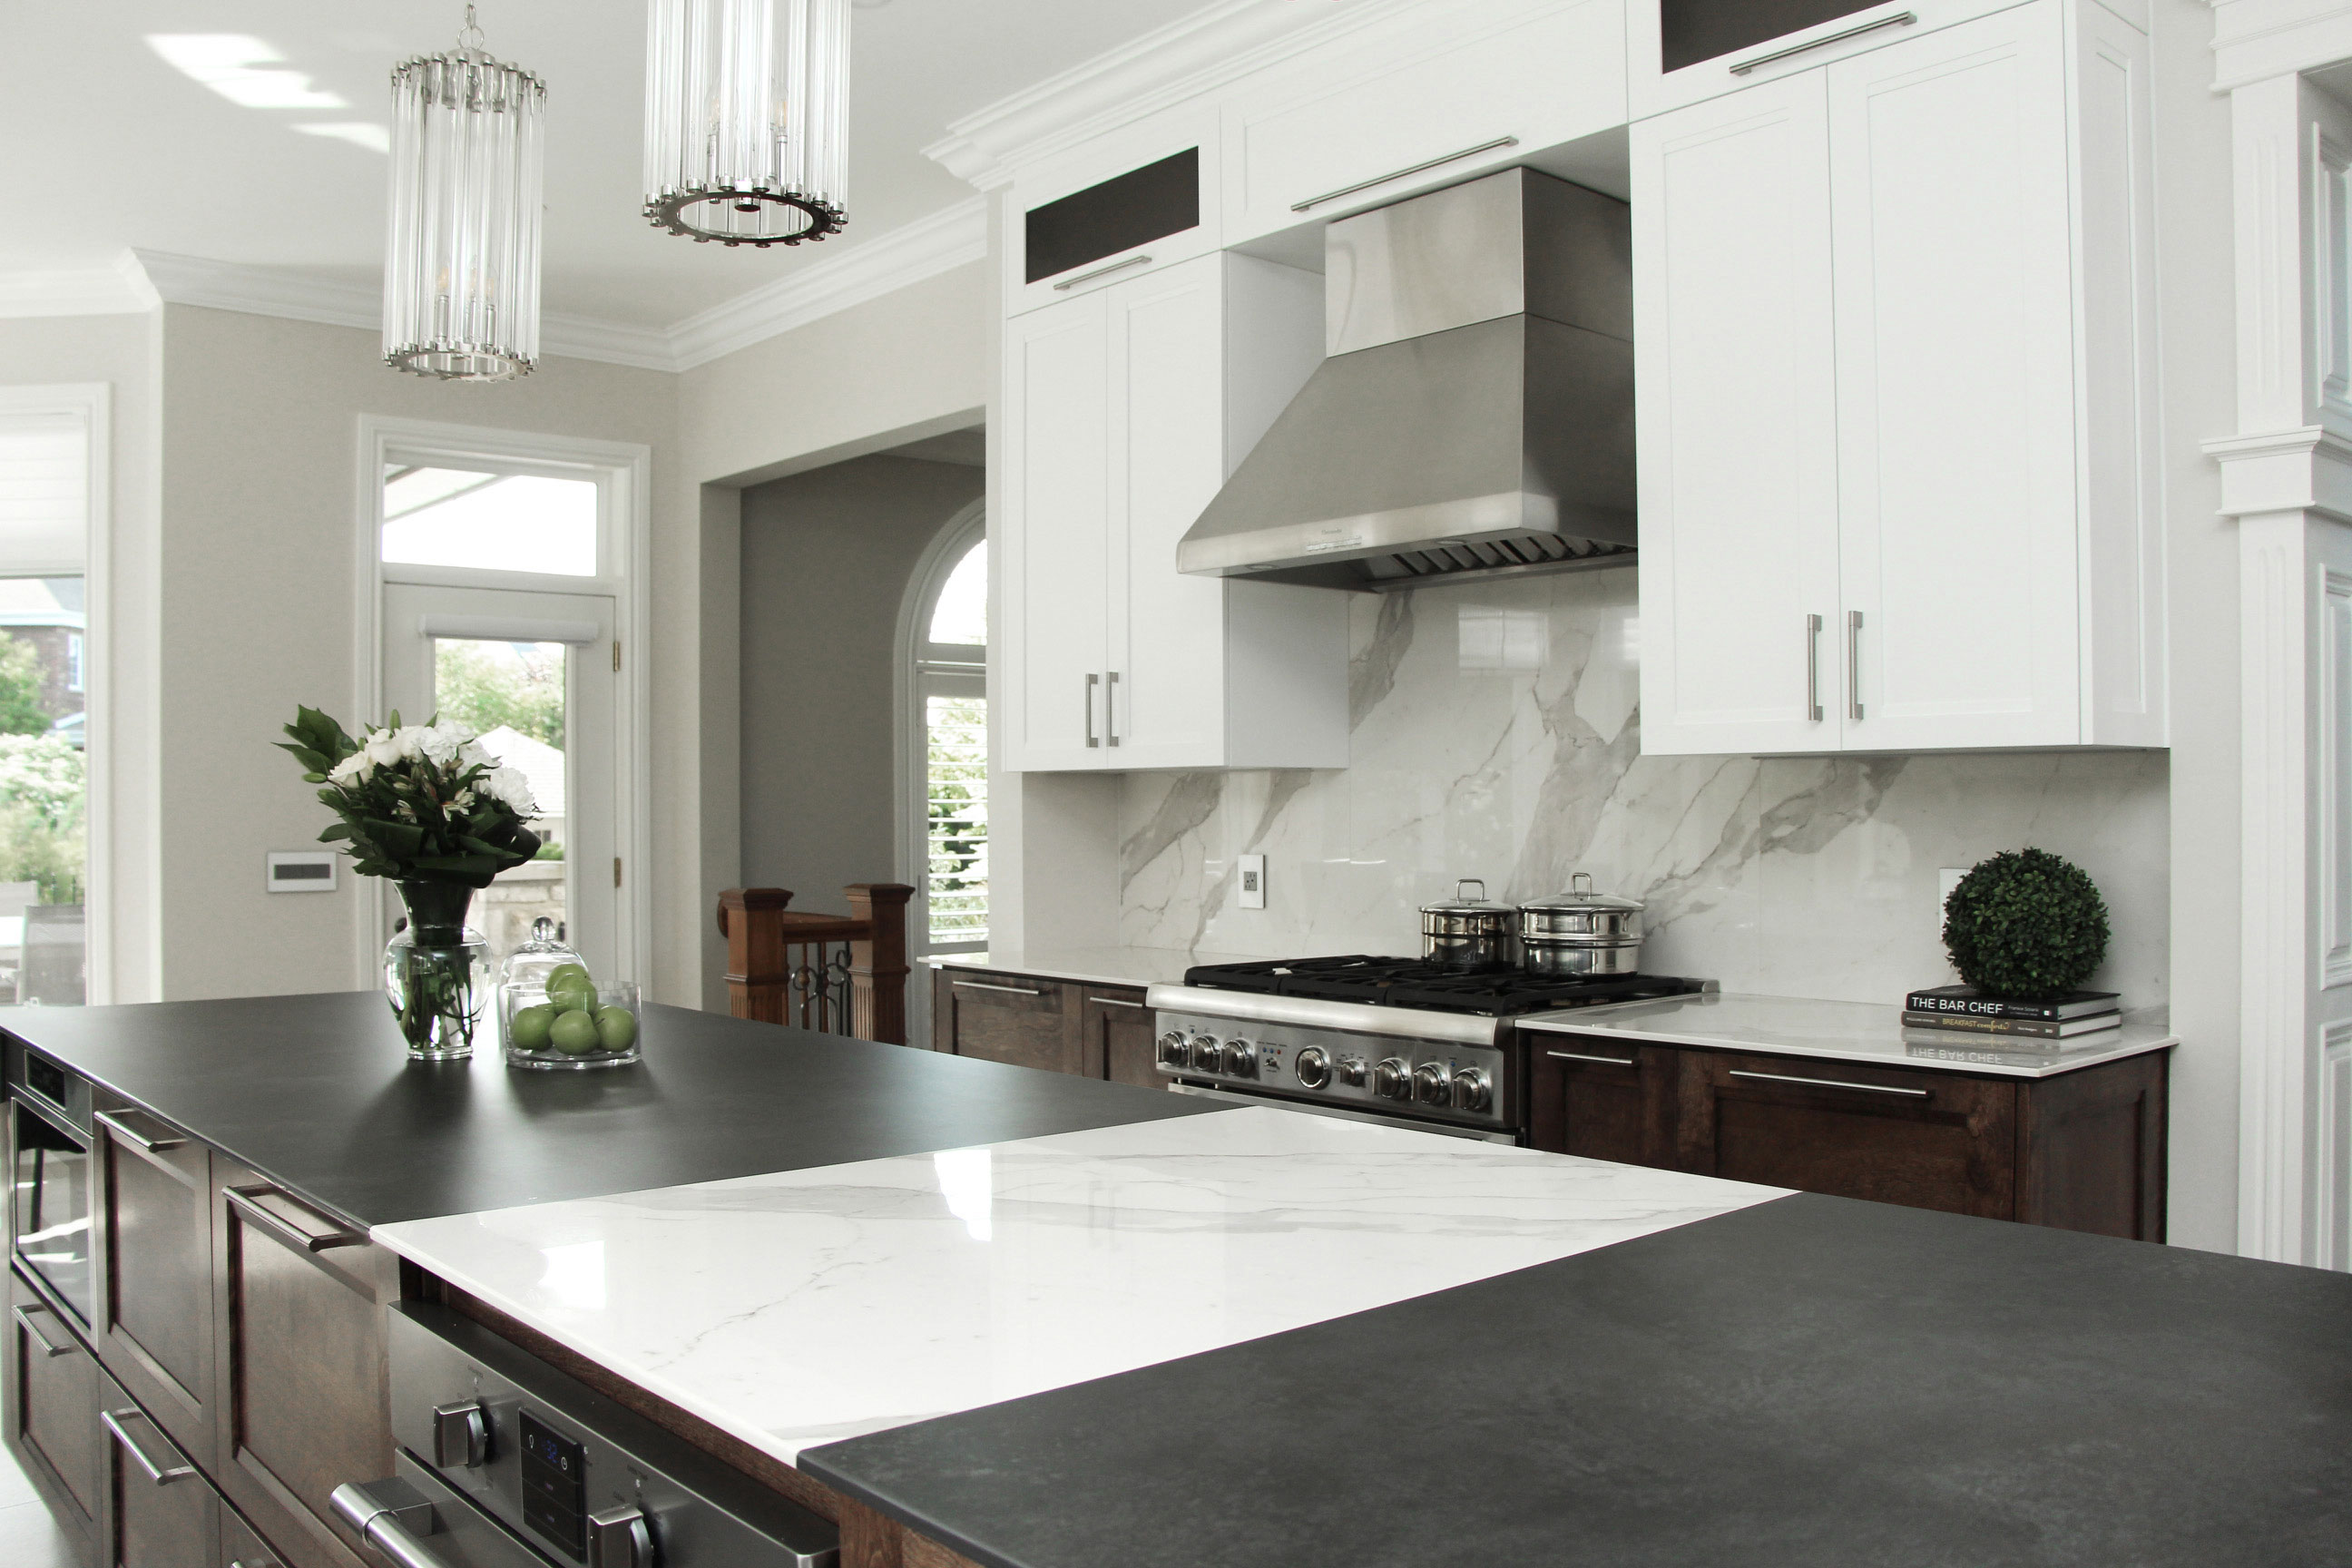 Stone Slab Countertops The 5 Best, What Is The Most Durable Material For Kitchen Counters